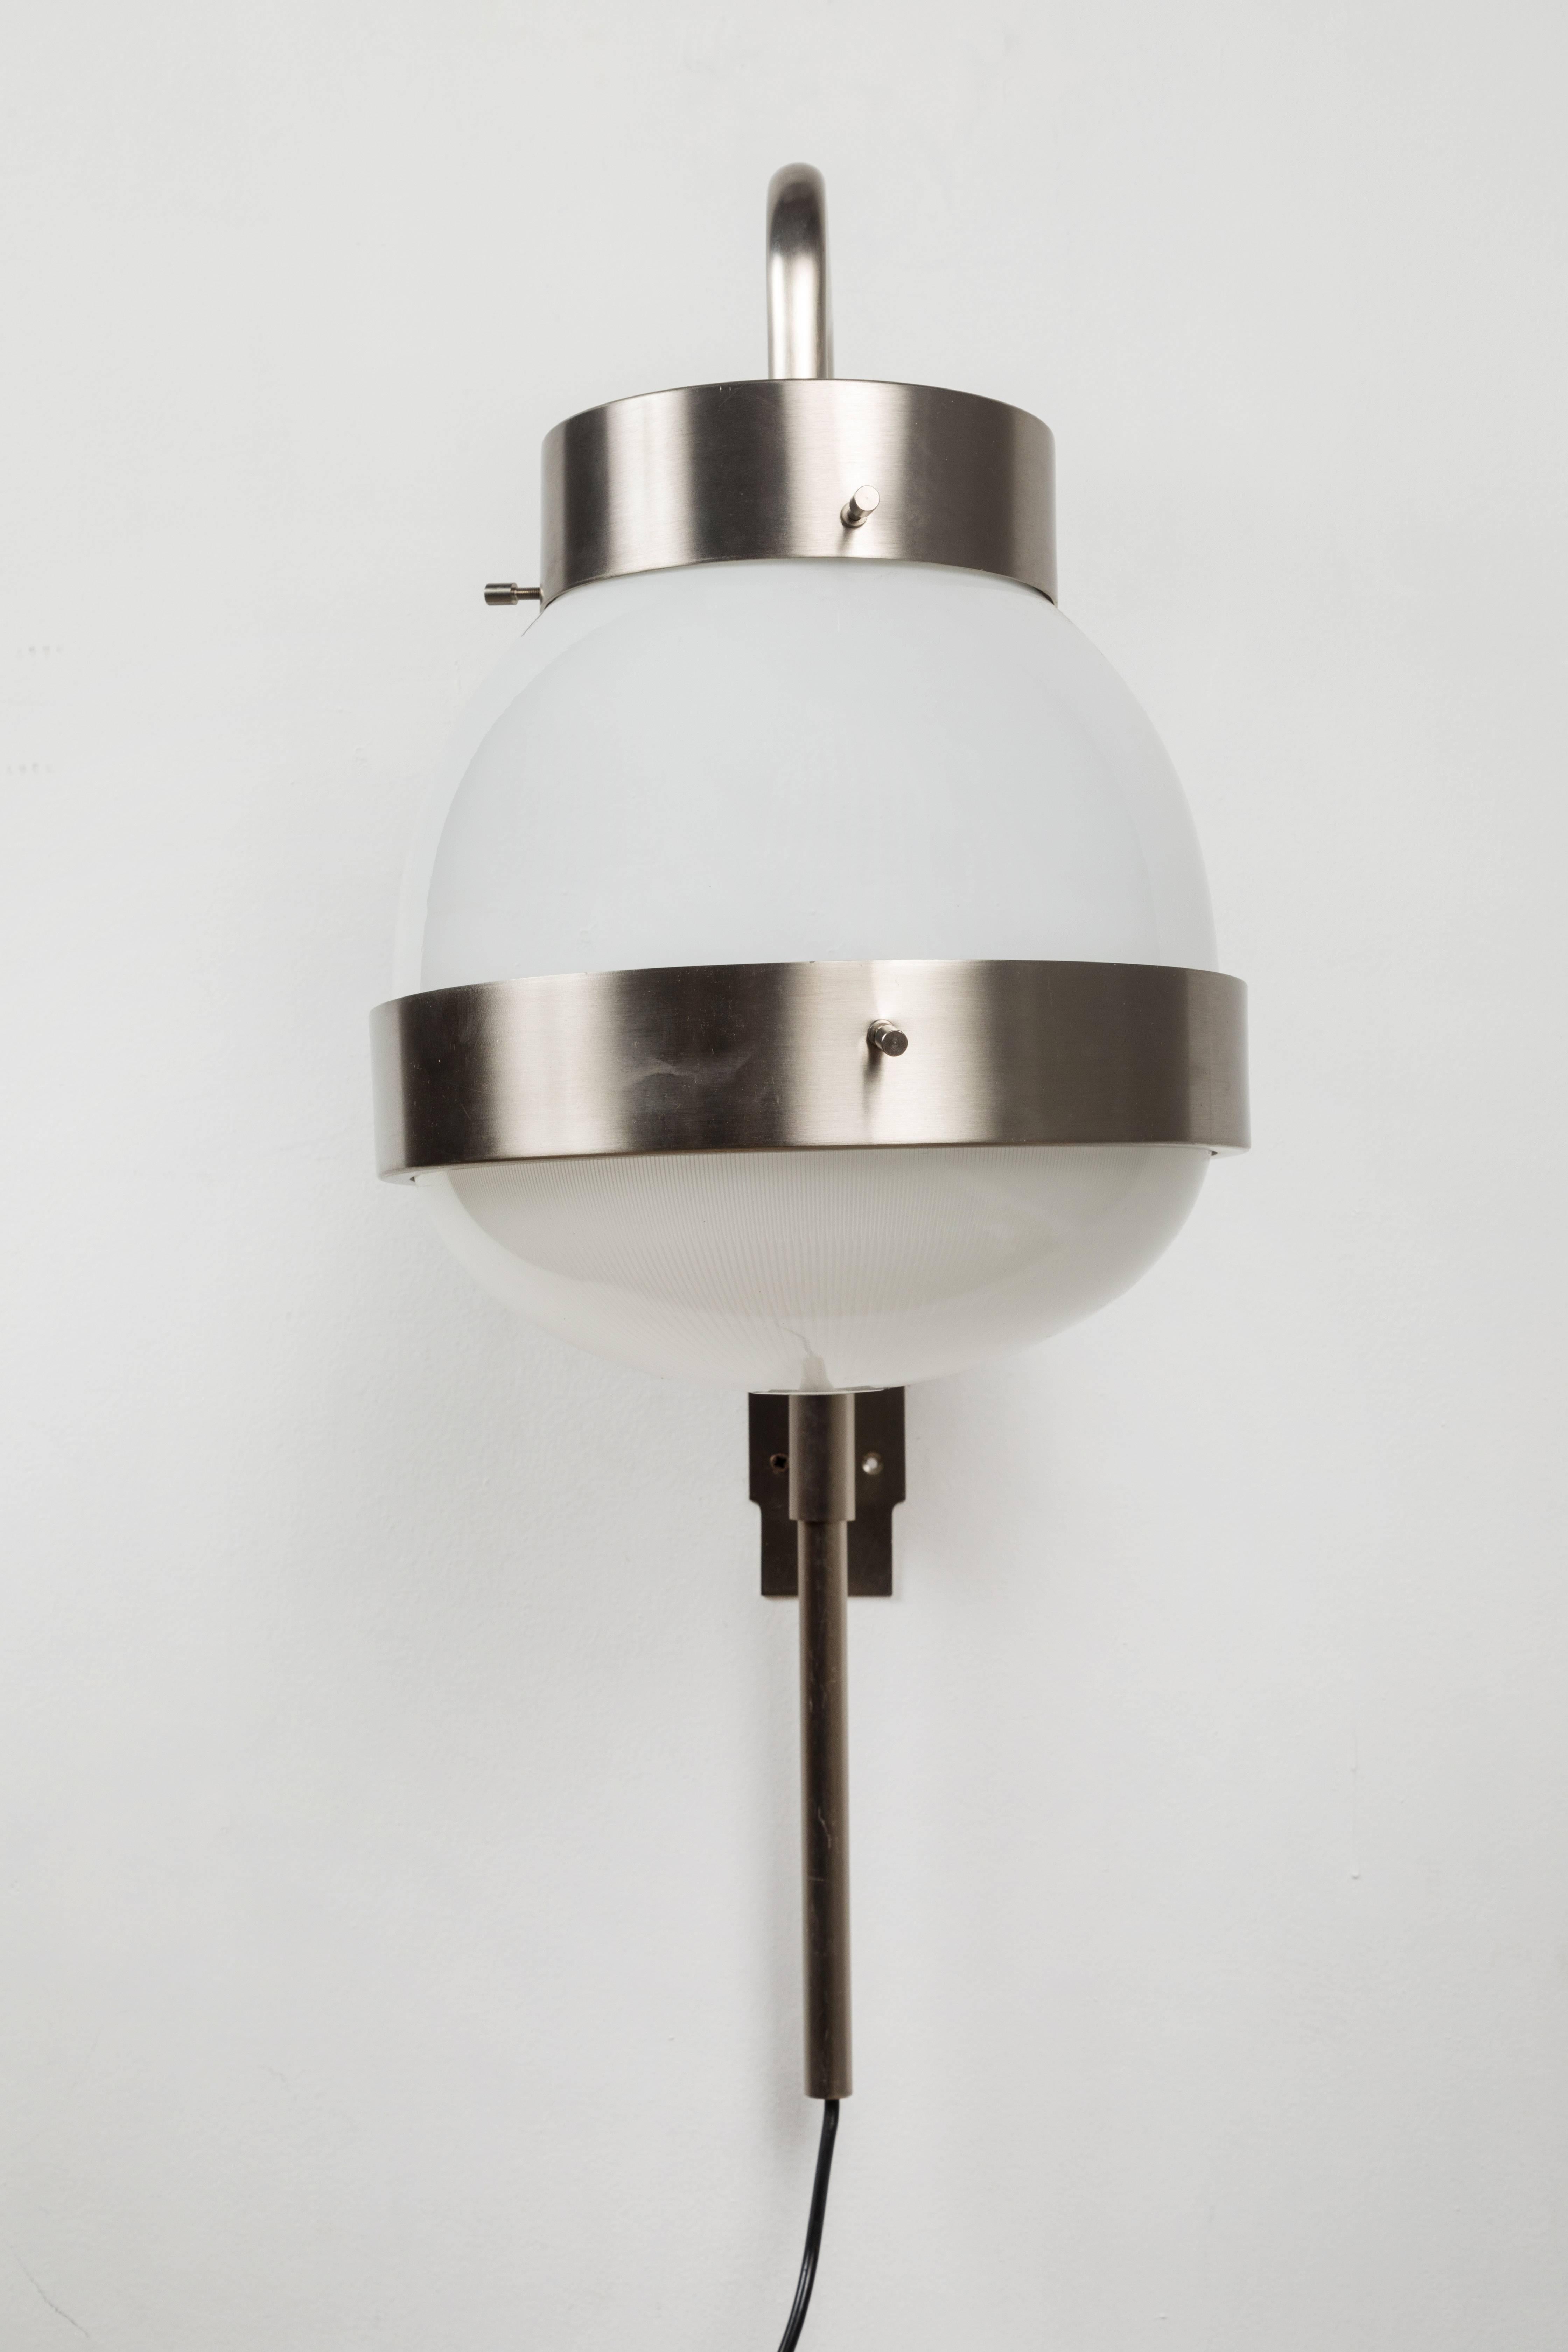 1960s Sergio Mazza 'Delta' wall lights for Artemide. Executed in brushed nickelled brass, pressed and glossy opaline glass. A highly adjustable light that can be rotated left or right as well as up an down. 

Price is per item. Four lamps